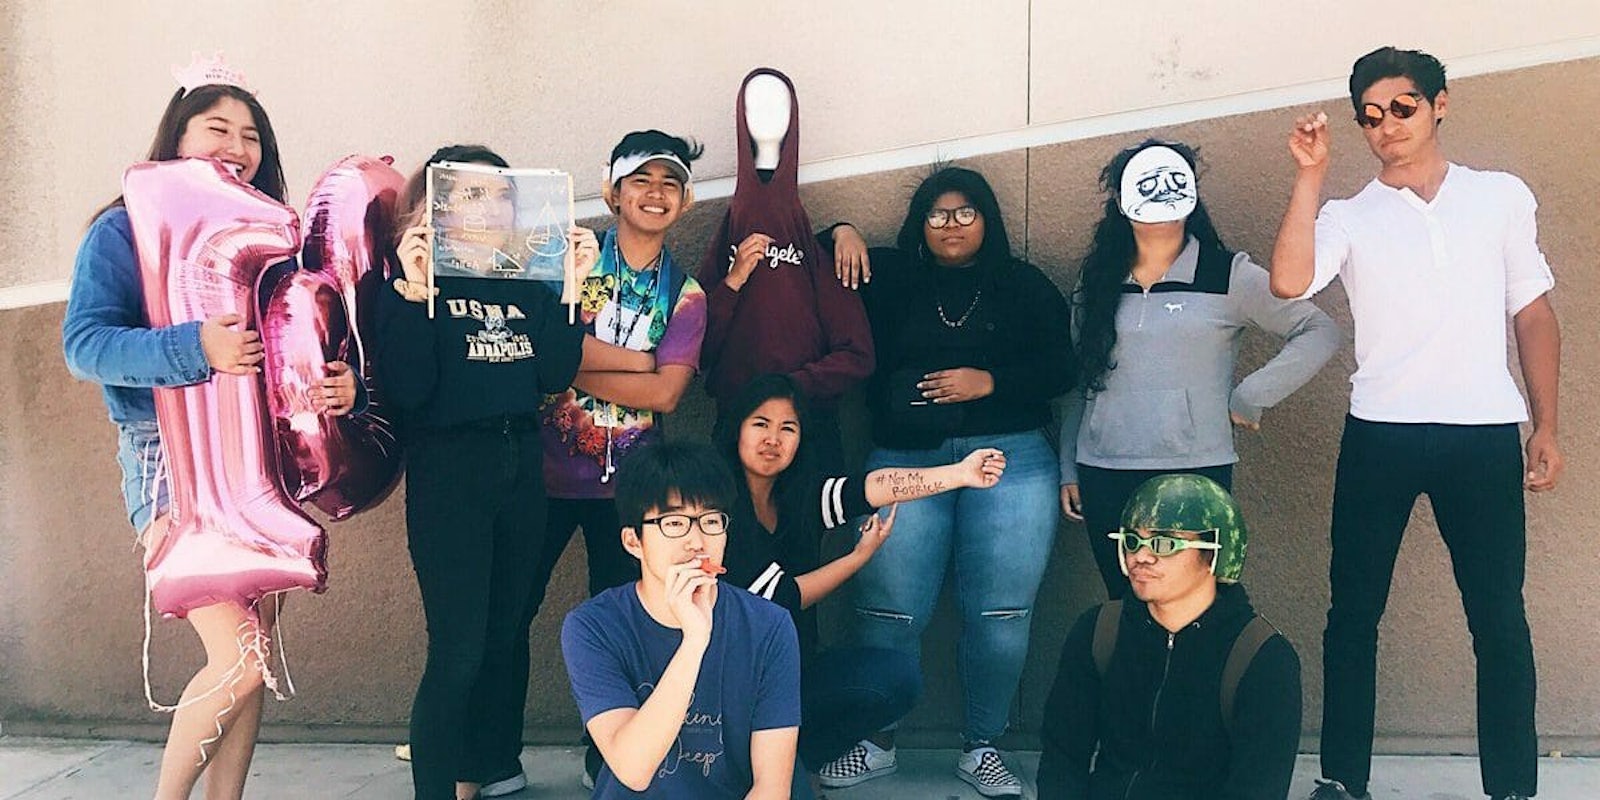 Olympian High School students dress up for Meme Day.